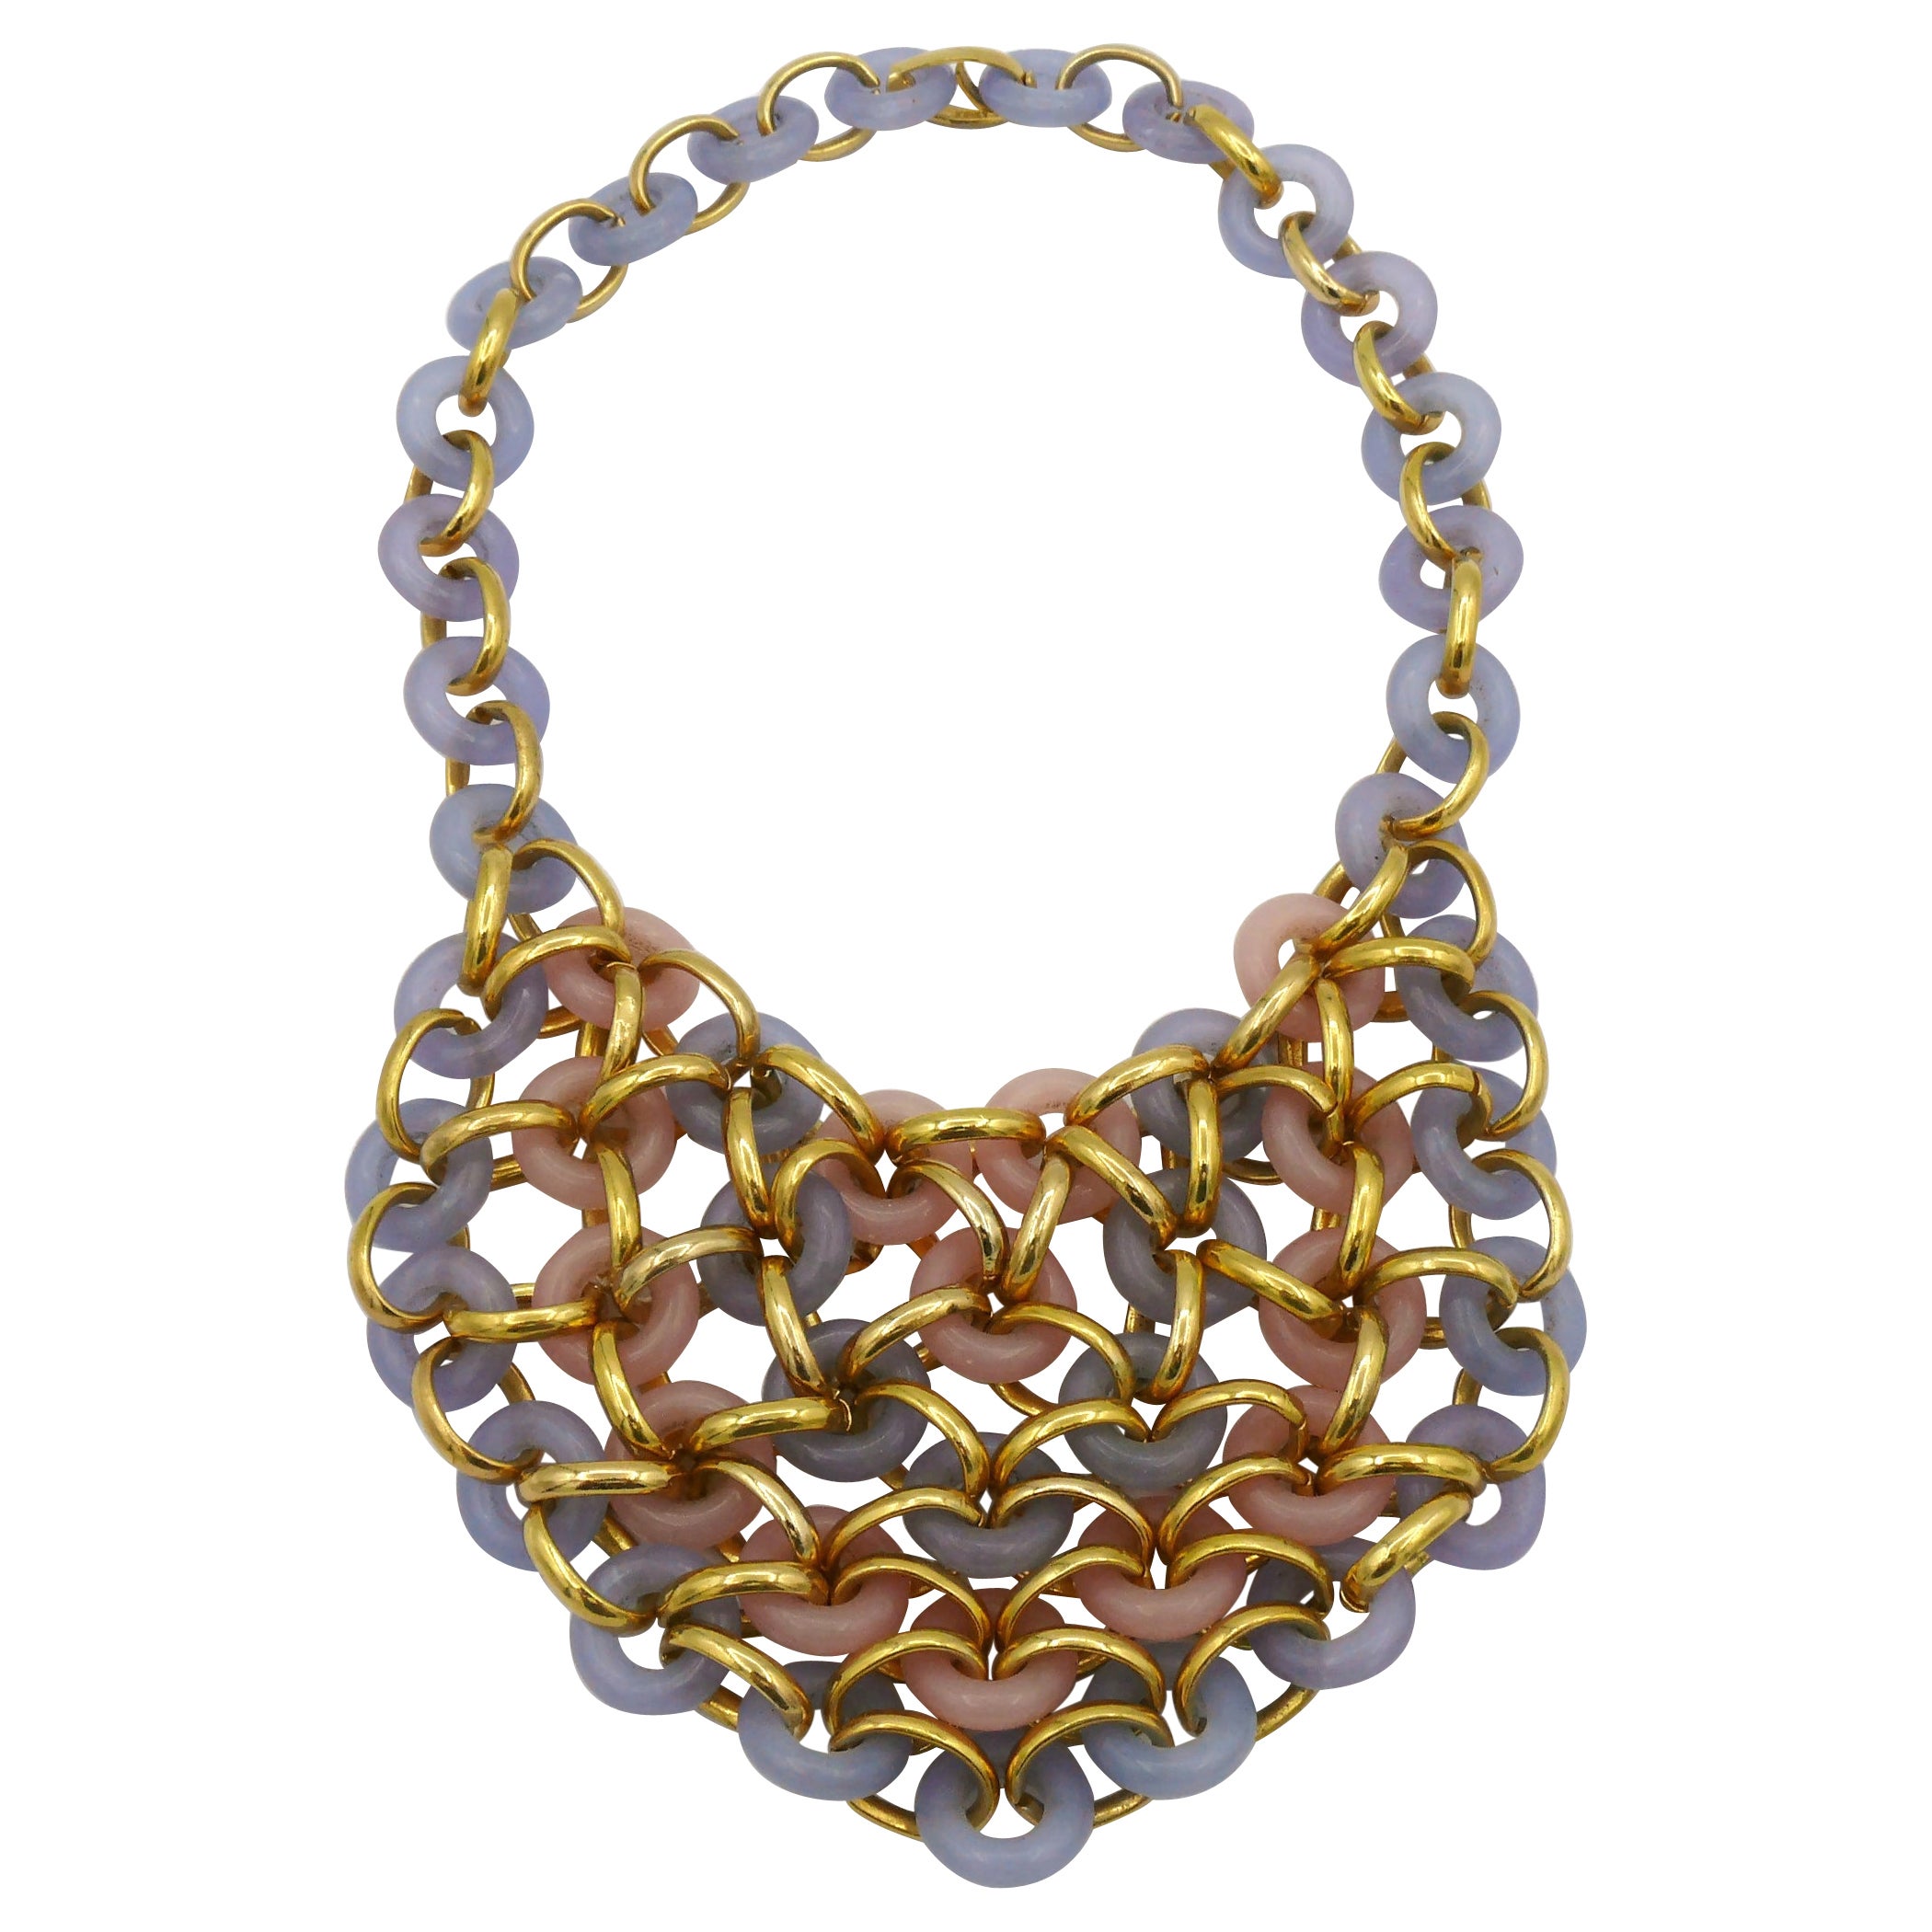 CHRISTIAN DIOR Vintage Gold Tone and Resin Necklace, 1974